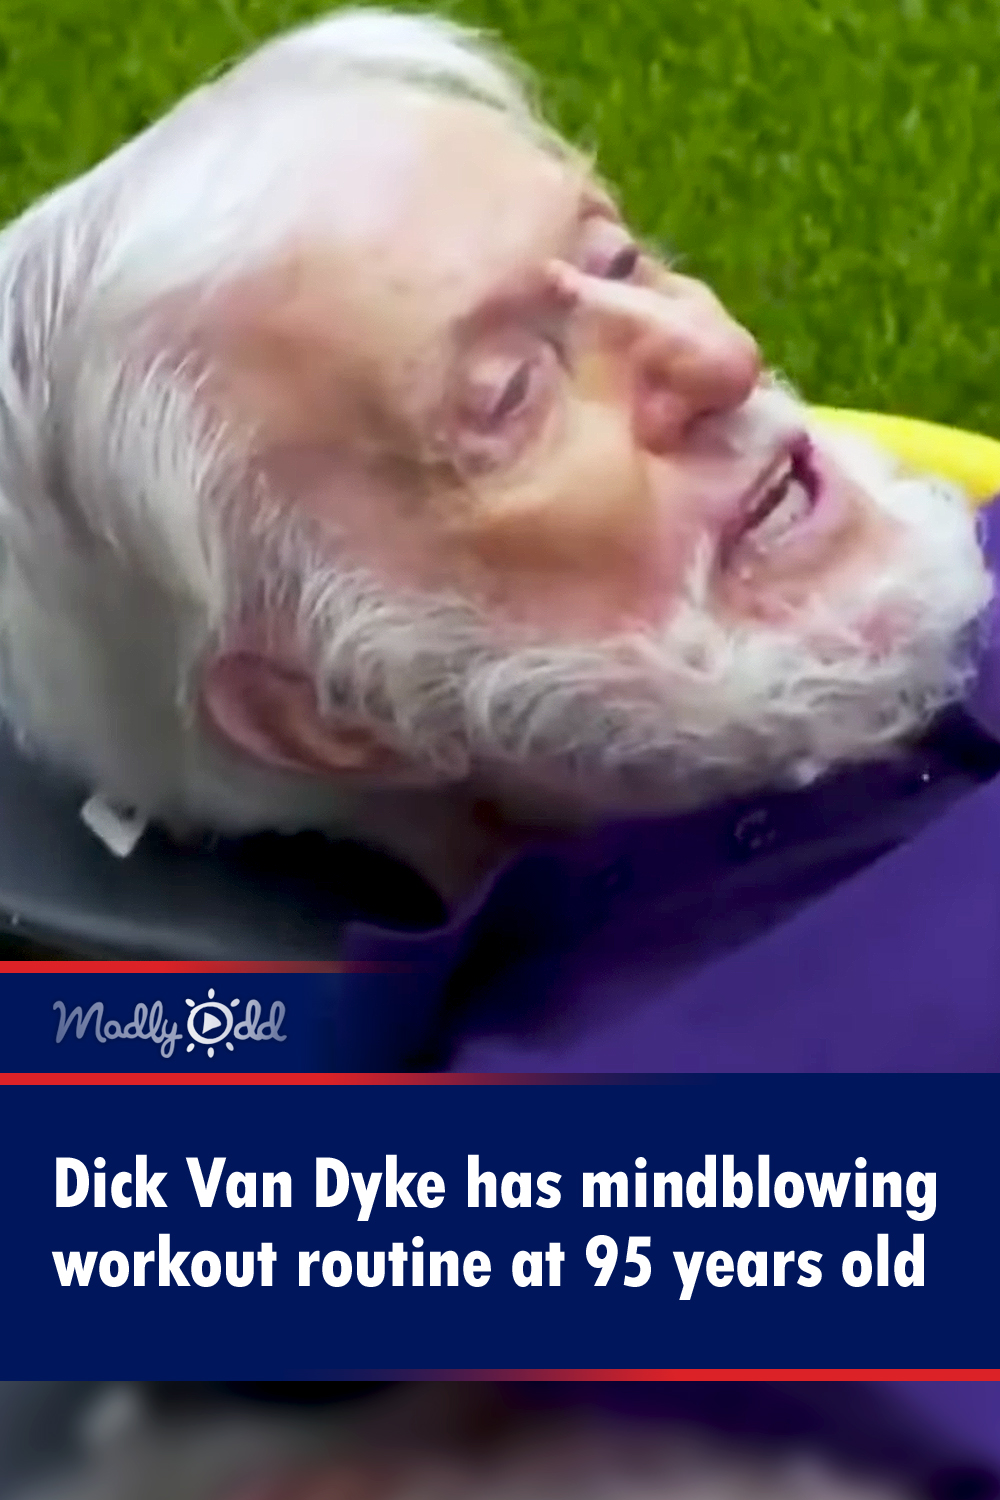 Dick Van Dyke has mindblowing workout routine at 95 years old